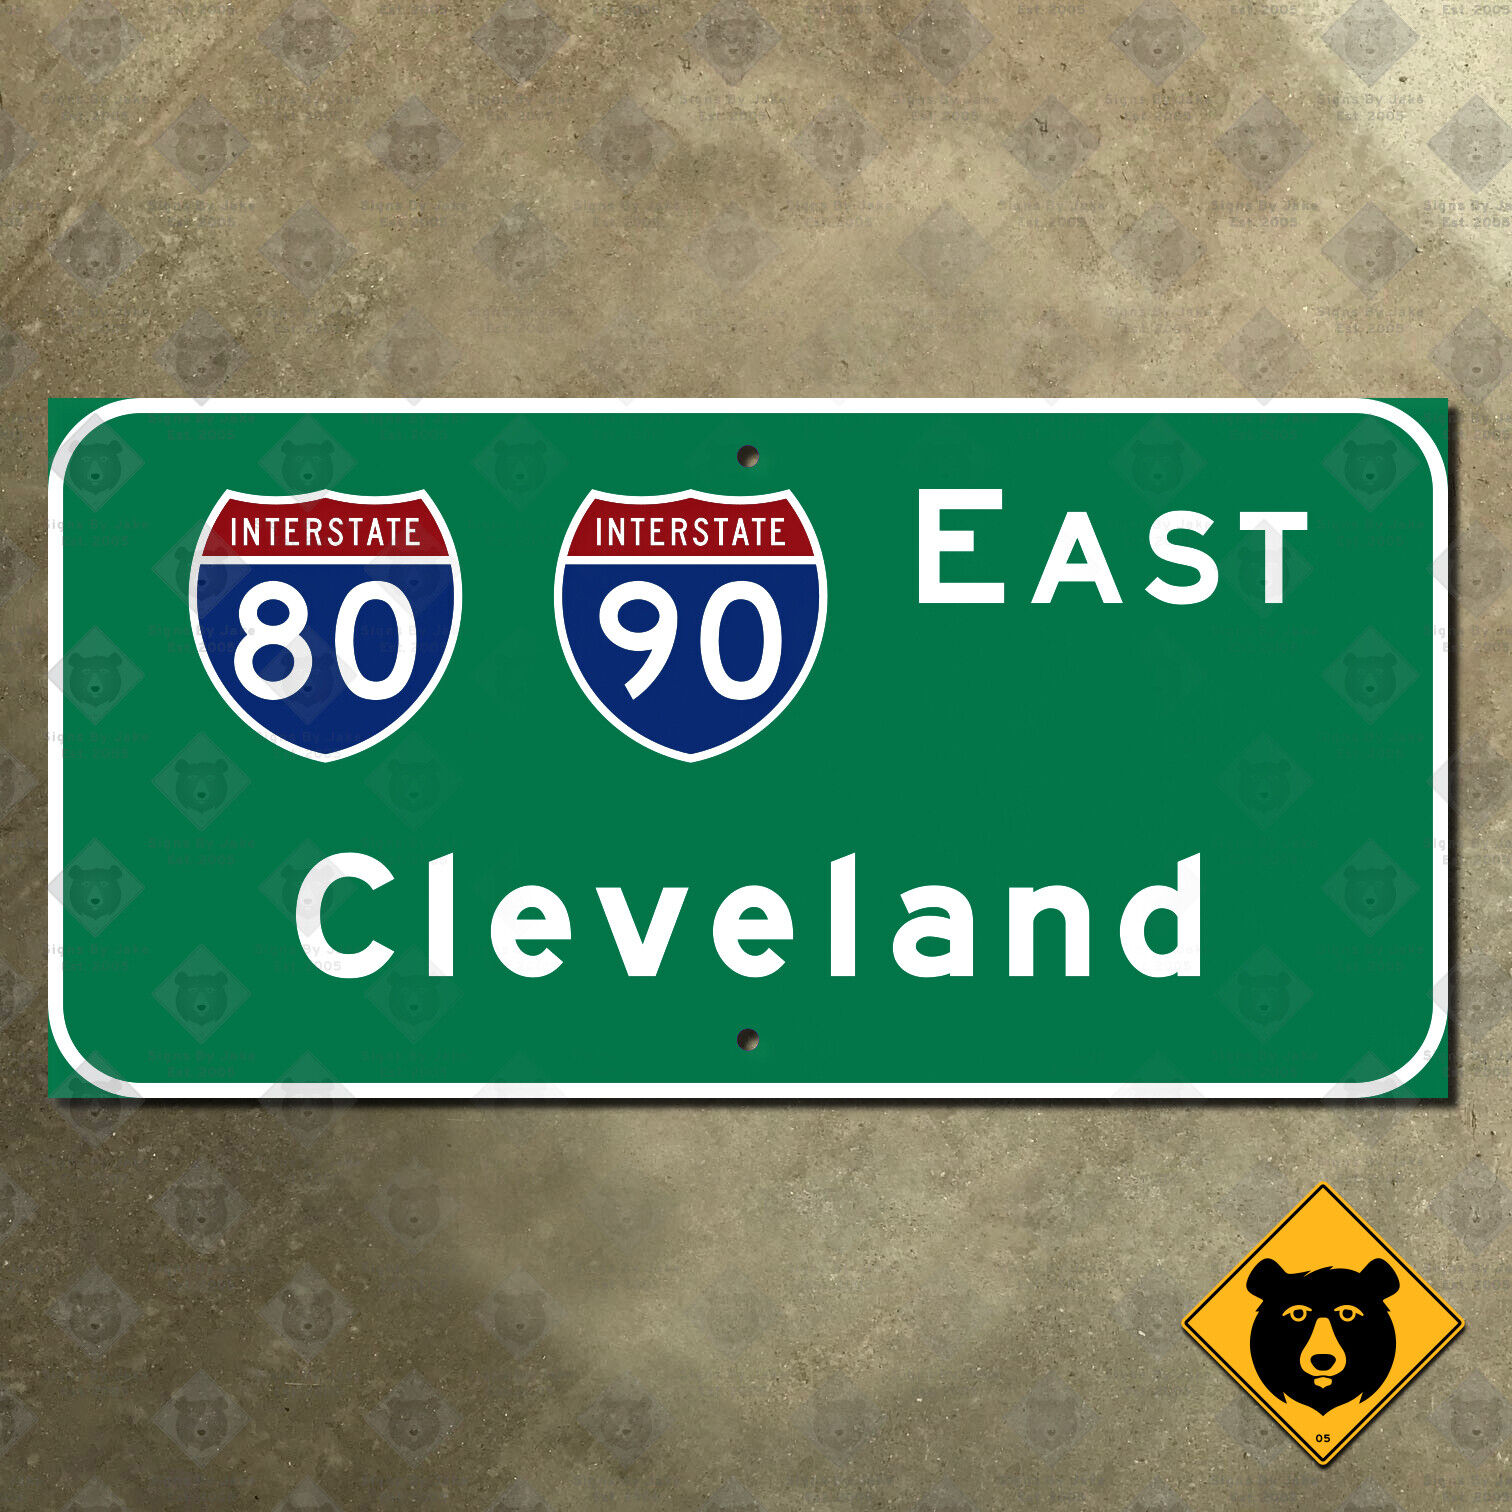 Ohio Turnpike Cleveland Interstate 80 90 east highway freeway road sign 16x8